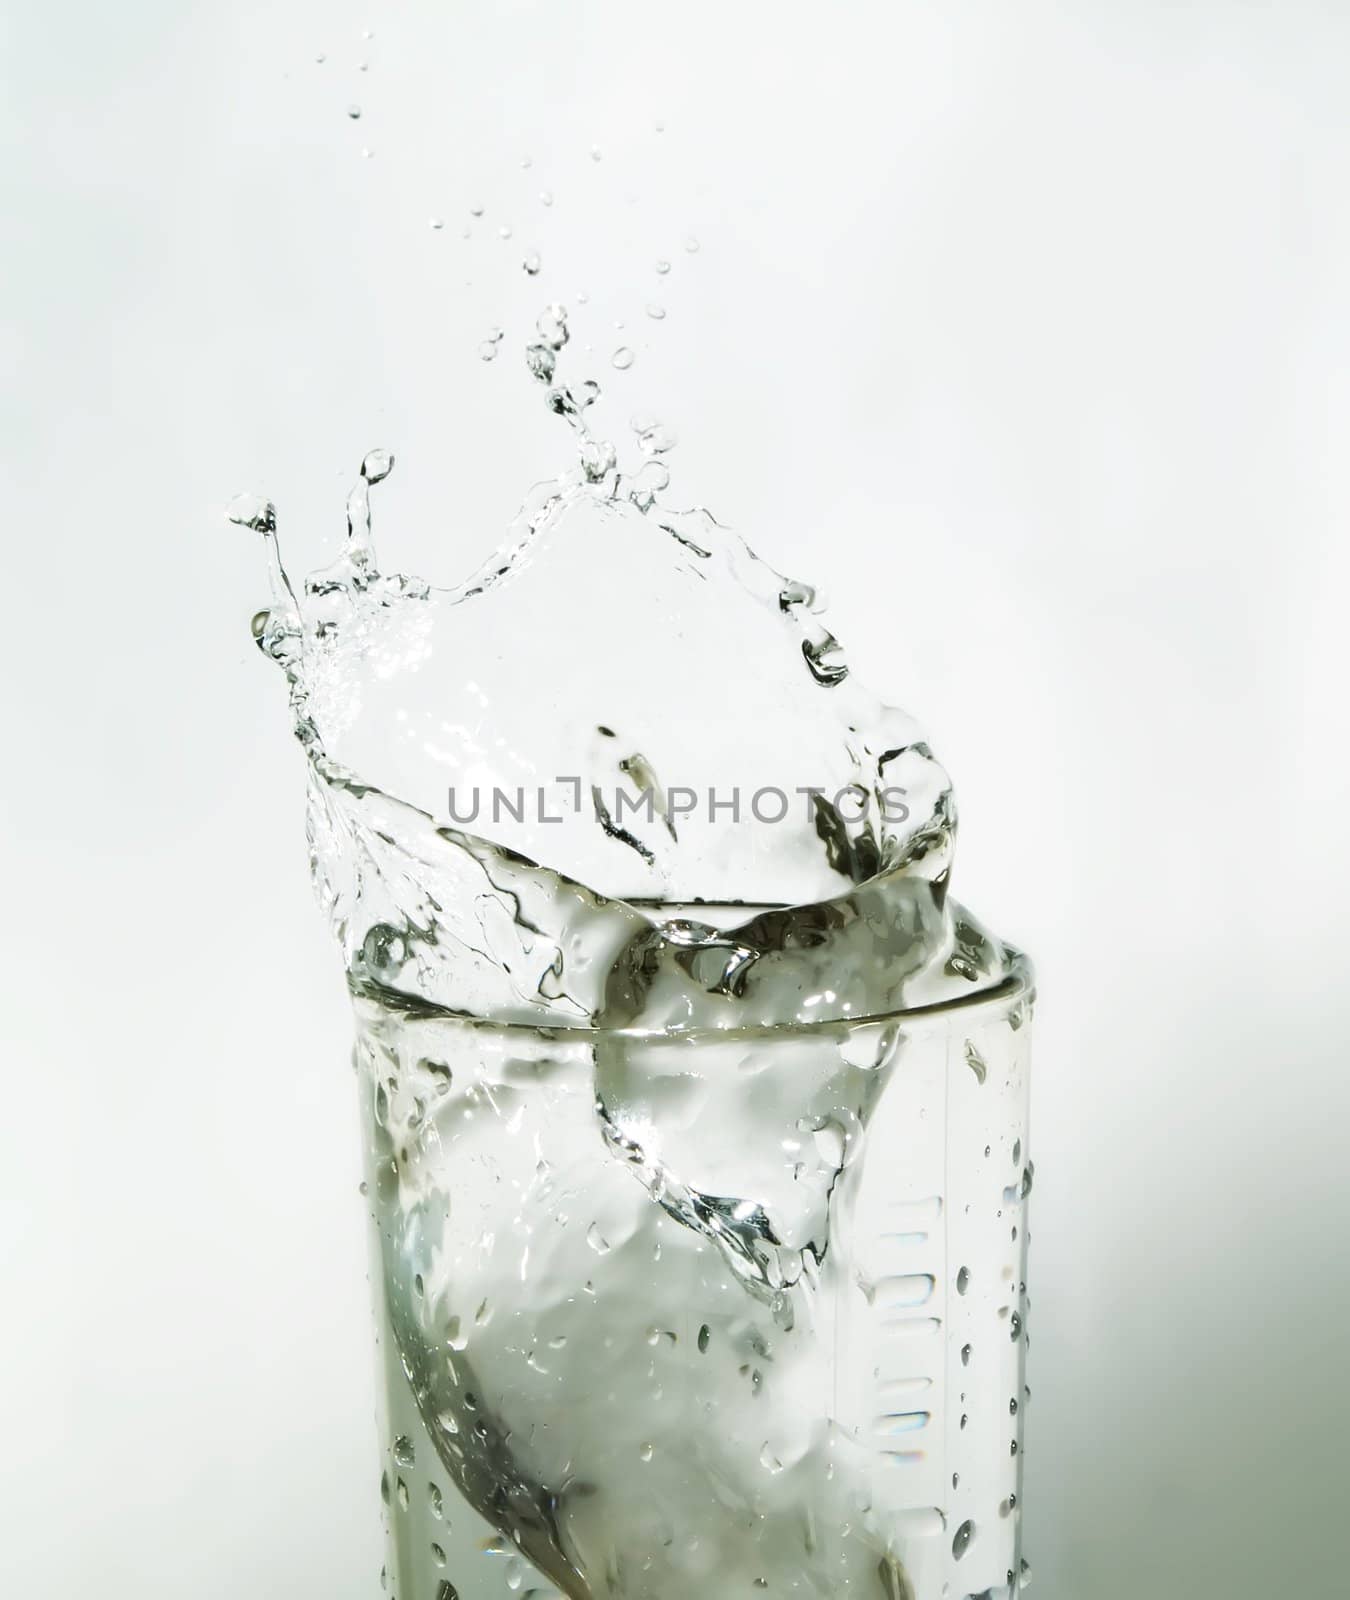 Sparks of water in a glass